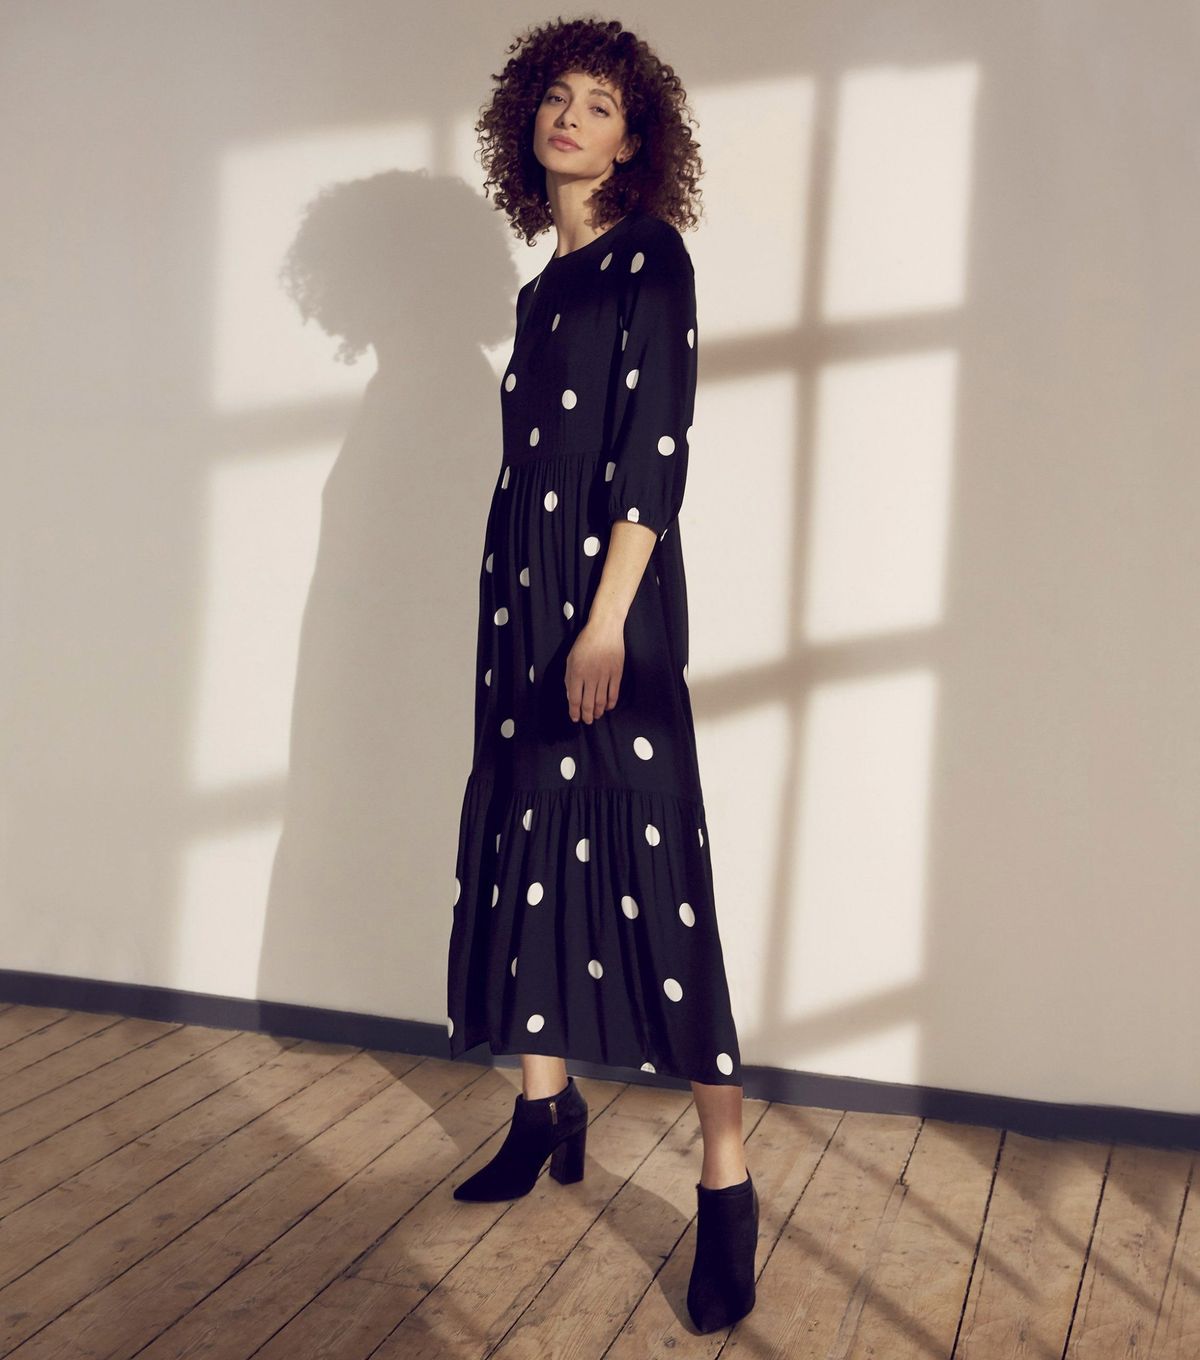 Long sleeve dress edit: 10 dresses with sleeves that cost £30 or less ...